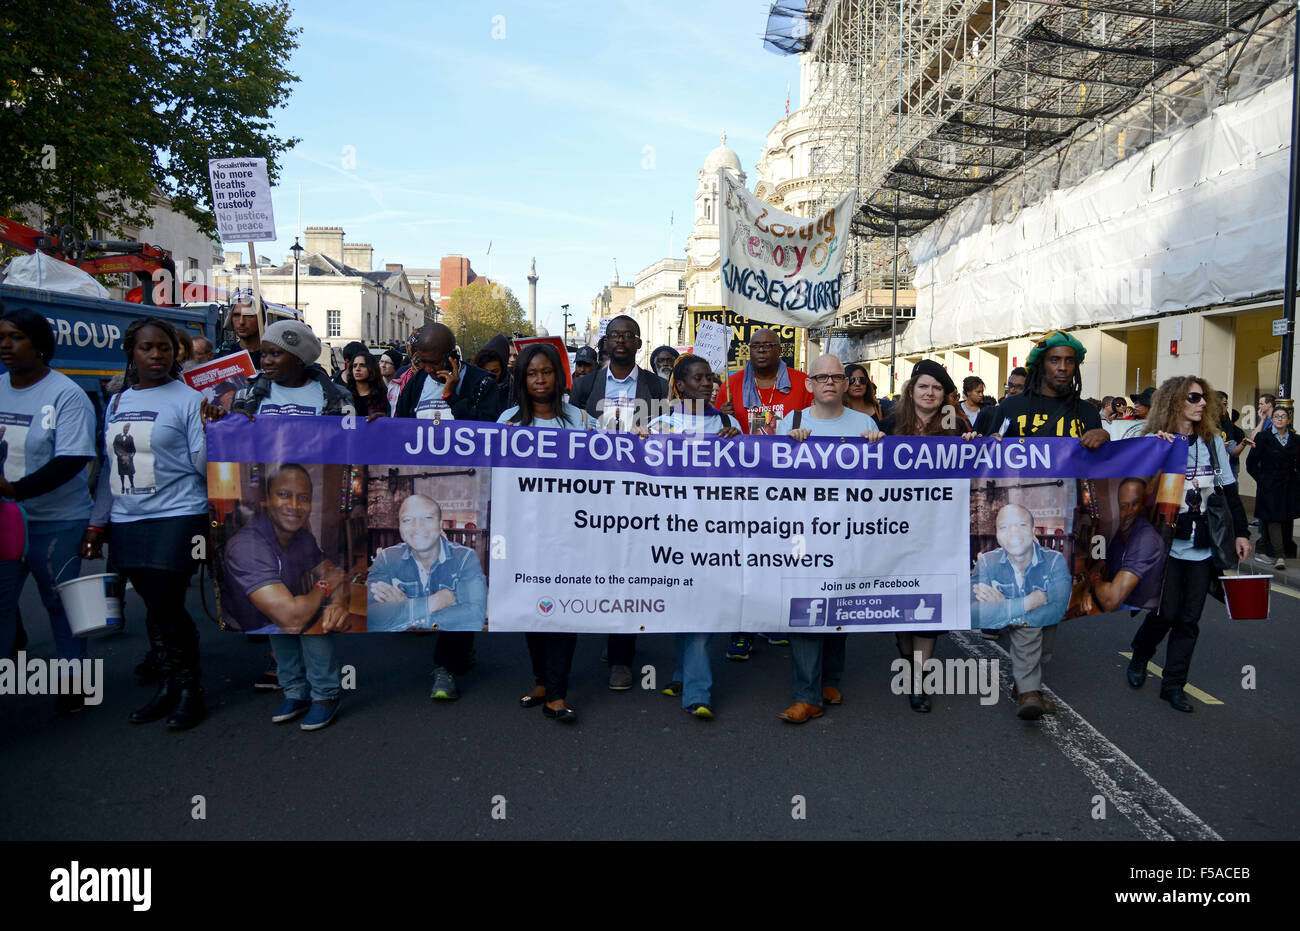 United Families and Friends Campaign, No more deaths in Police Custody, protest march to Downing Street, showing Justice for Sheku Bayoh banner, London, Britain, UK Stock Photo